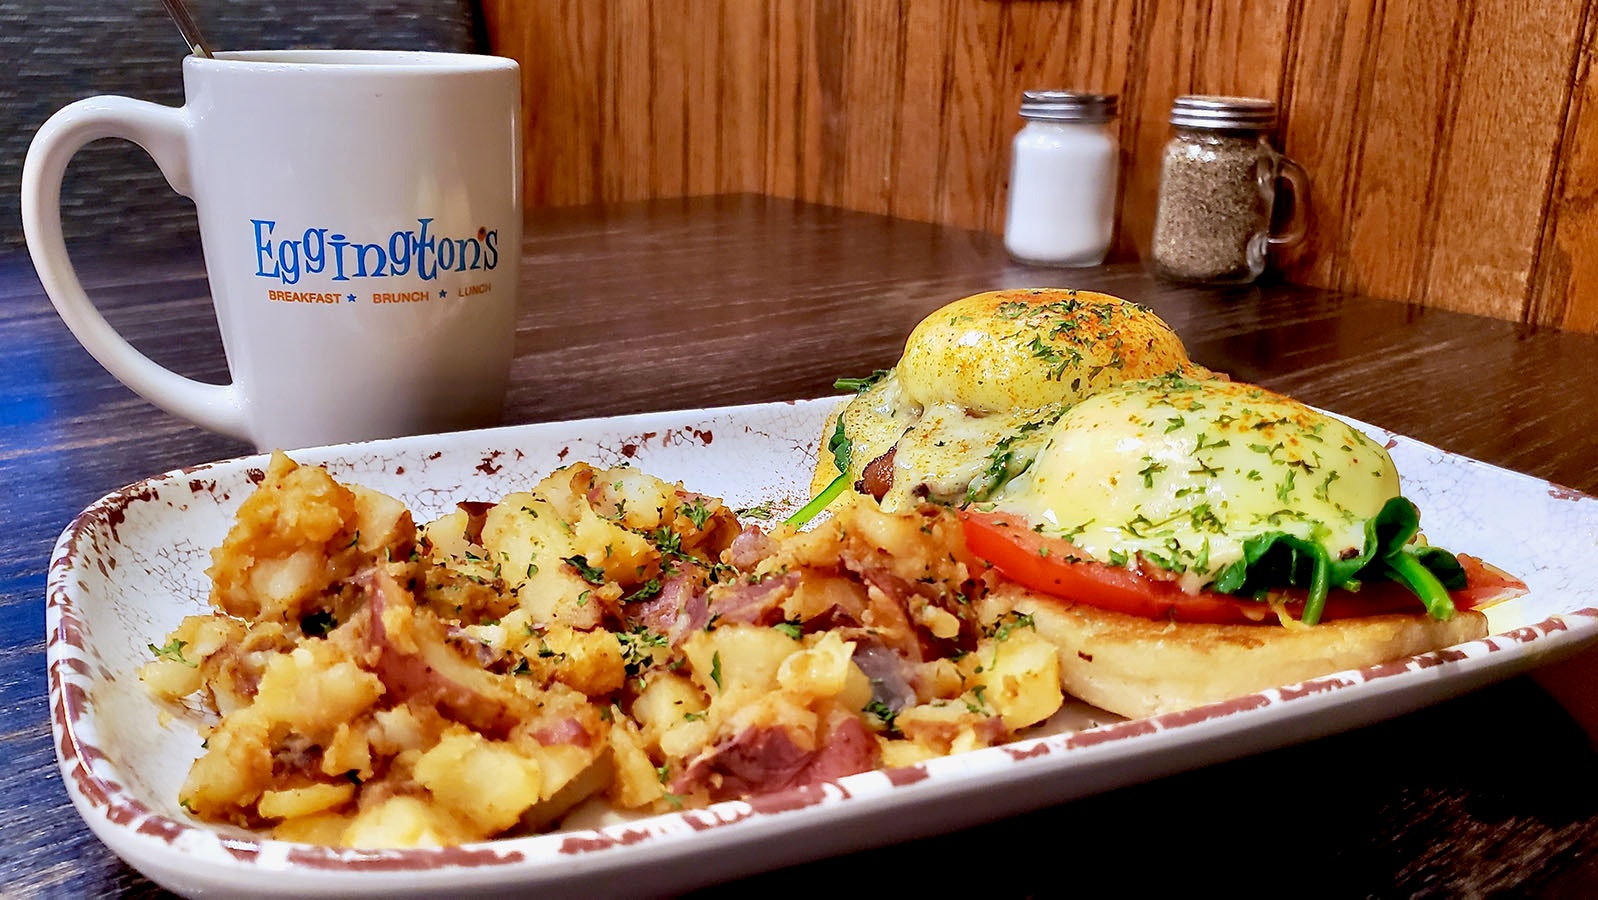 Egginton's in Casper is known for its variety of eggs Benedicts, like this one Florentine style with red-skinned potatoes and coffee.